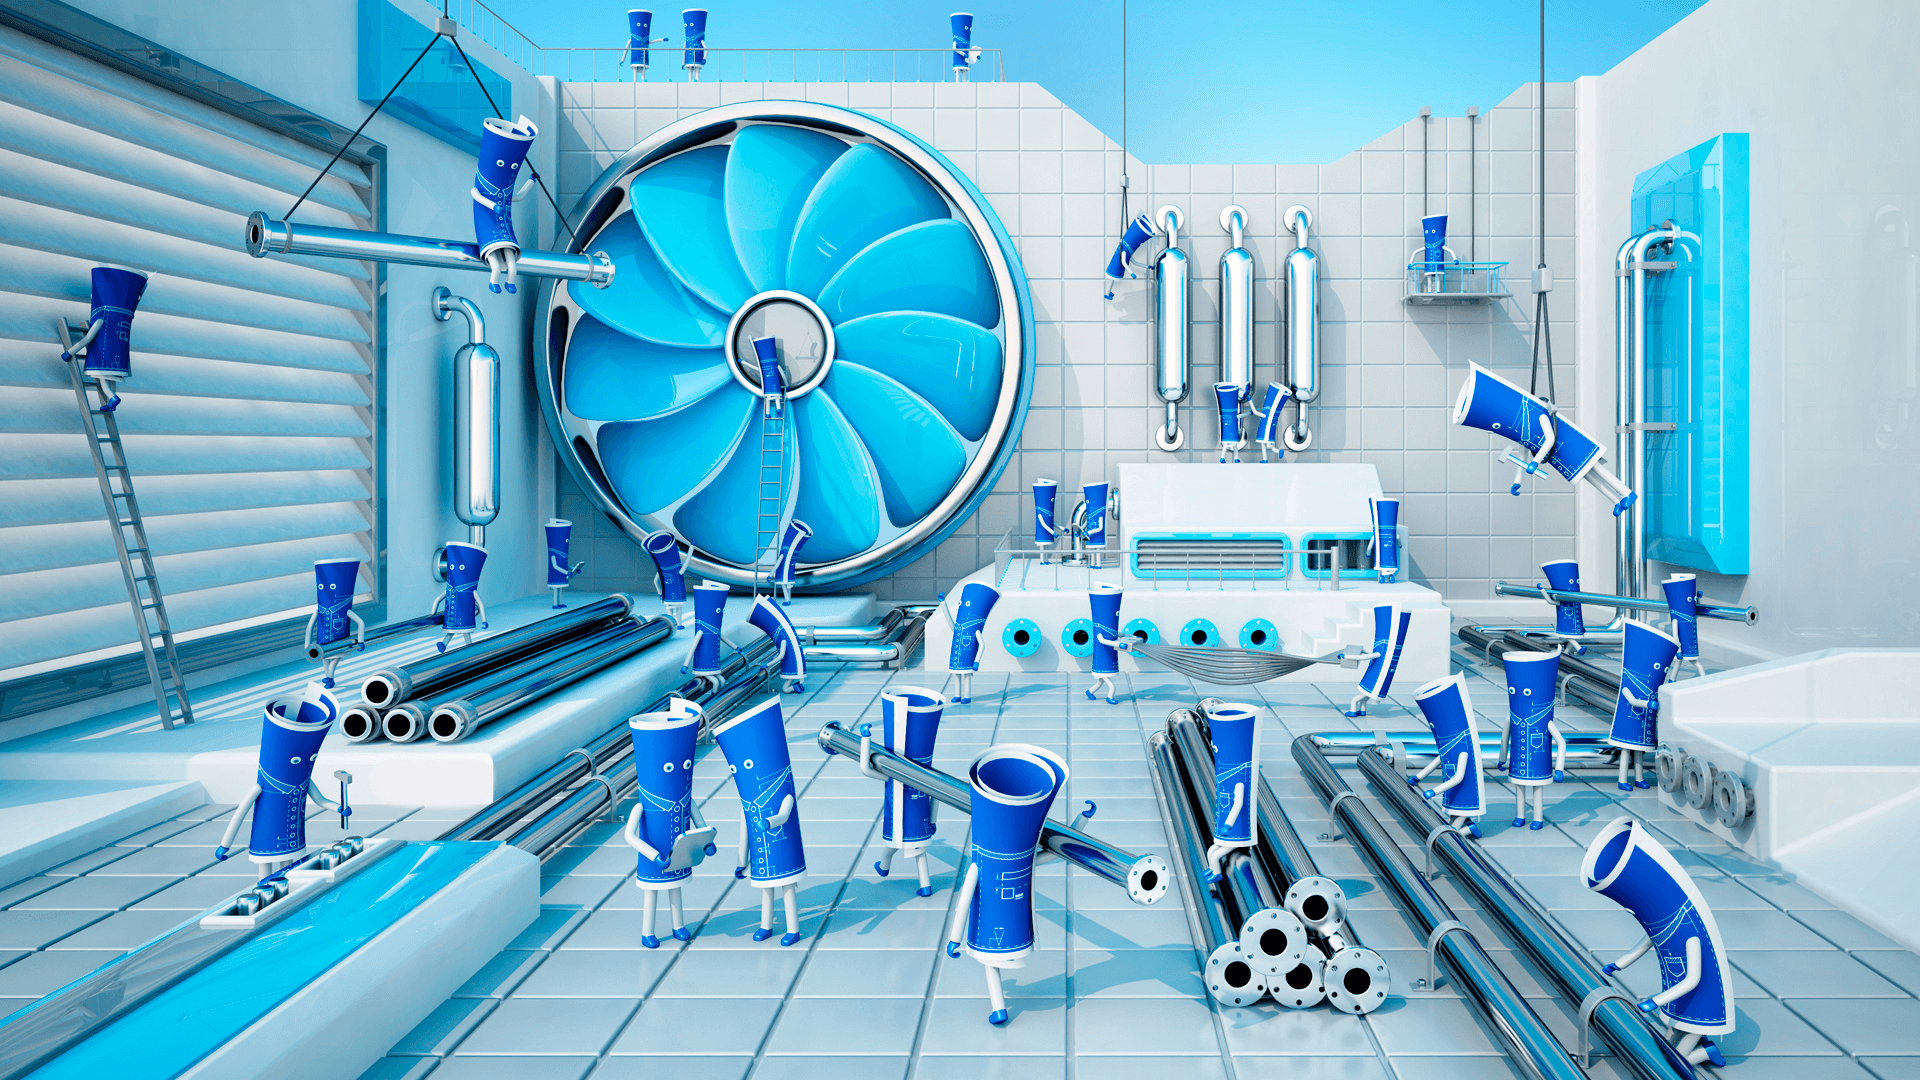 Steam Powered Air Conditioner Cleaning In 3d Background, Hvac, Air Cooler, Air  Conditioners Background Image And Wallpaper for Free Download